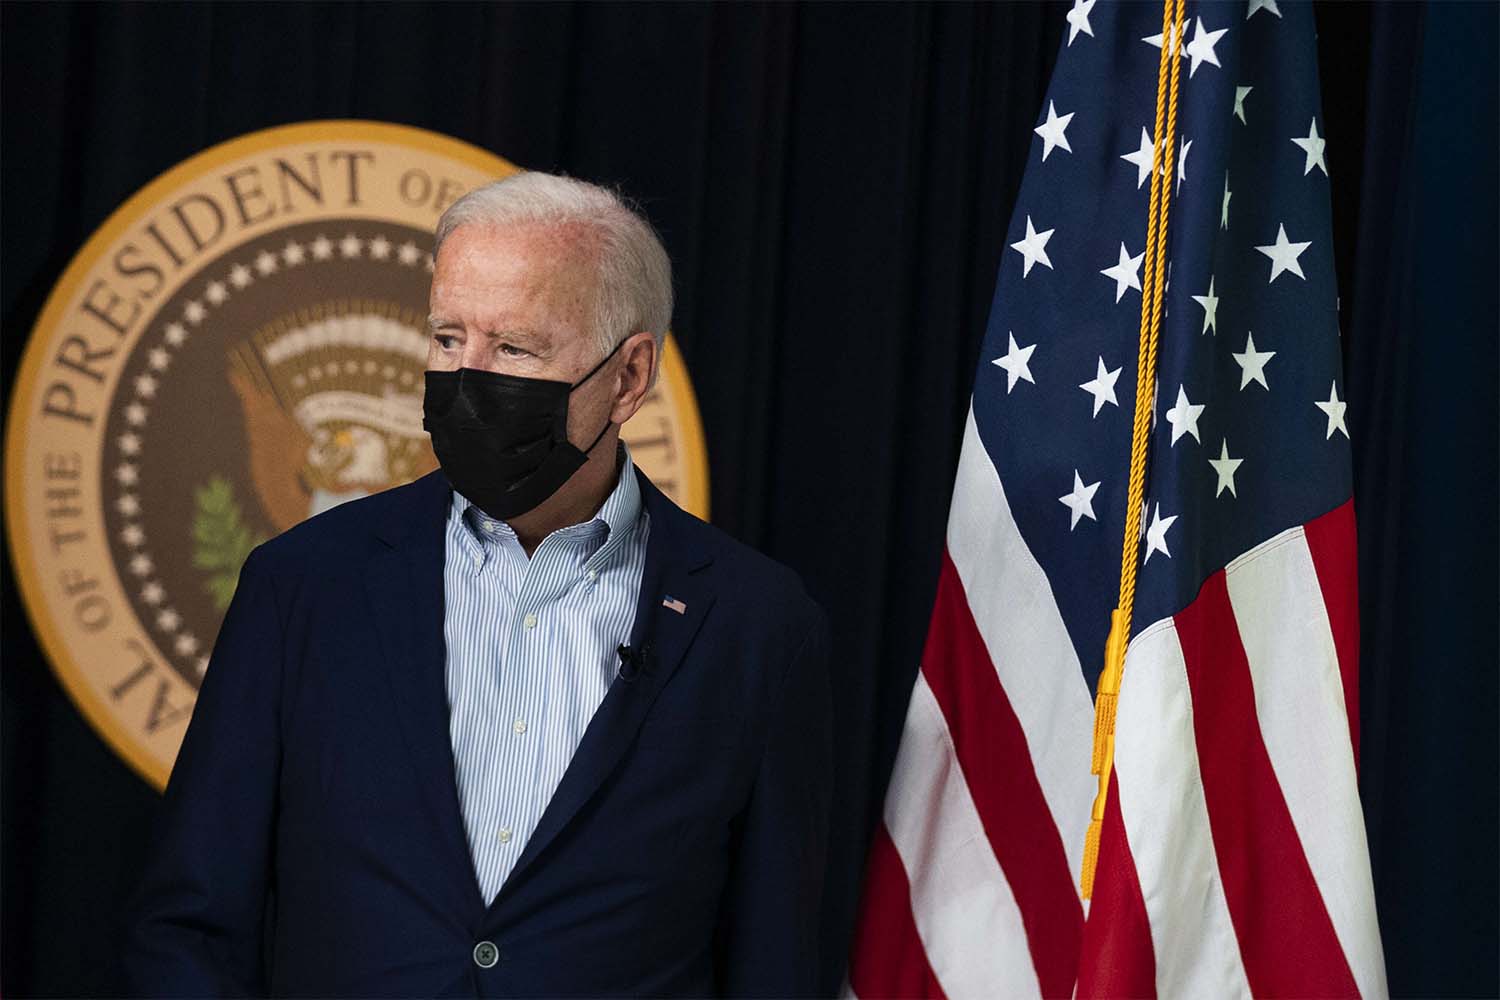 Biden said the extremists can expect more attacks